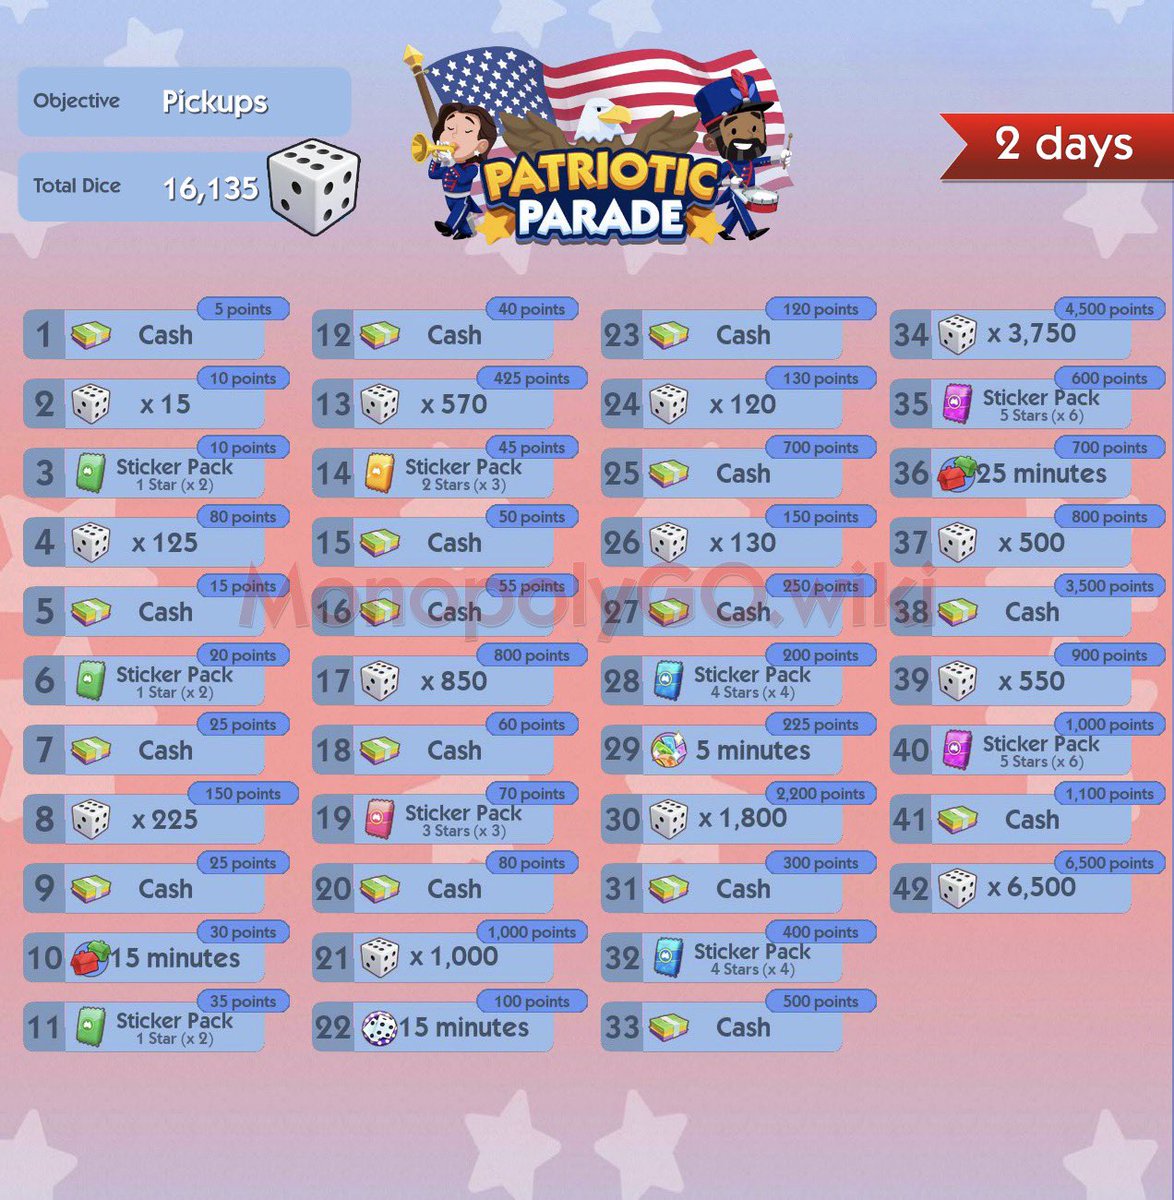 𝗦𝗼𝗹𝗼 𝗘𝘃𝗲𝗻𝘁: Patriotic Parade
May 27th, 2024 @ 10am (CST) (2 days)

𝐎𝐛𝐣𝐞𝐜𝐭𝐢𝐯𝐞:
Land on pickups
#Monopoly #MonopolyGo